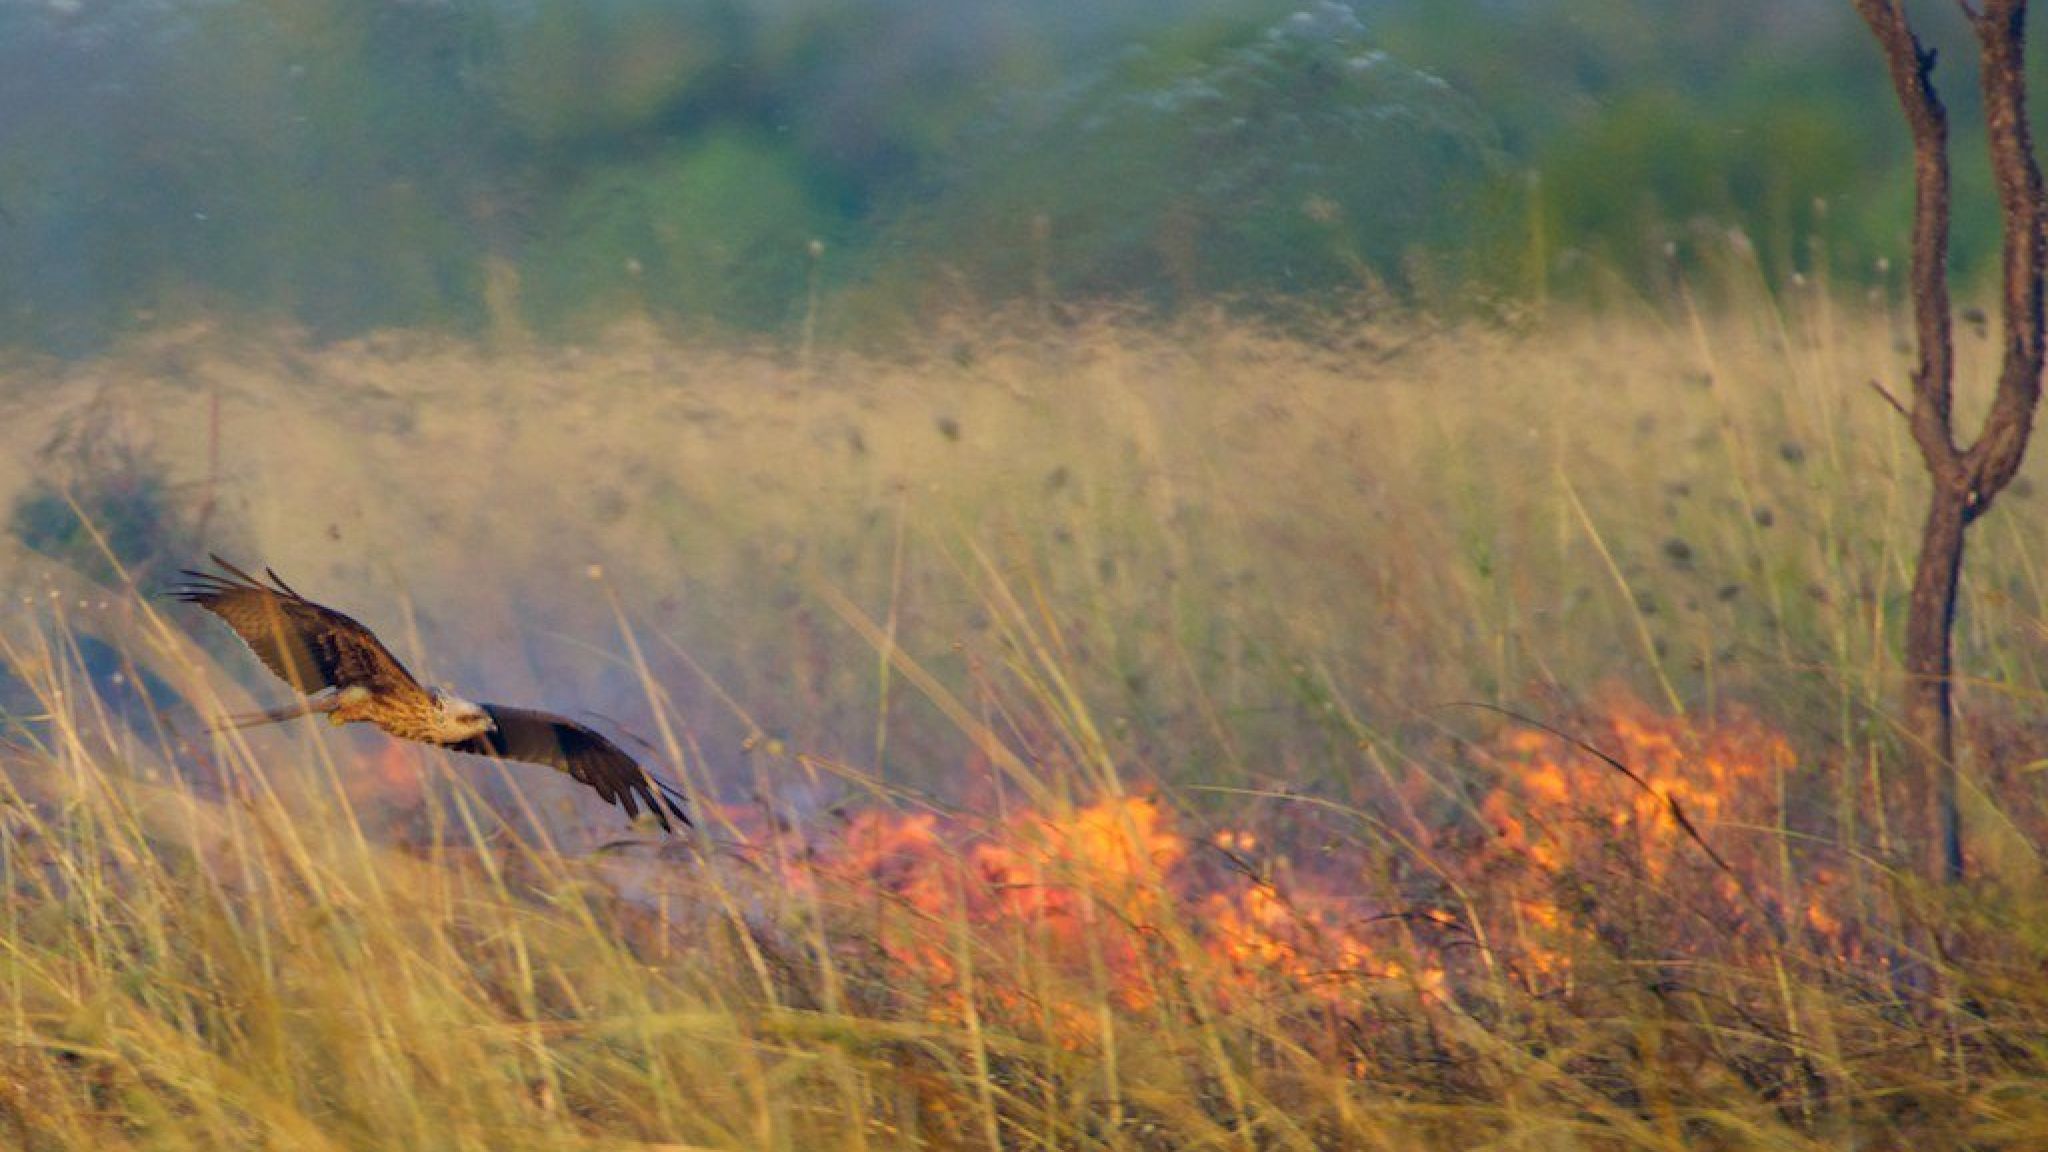 Australian wildfires could have been spread by birds of prey